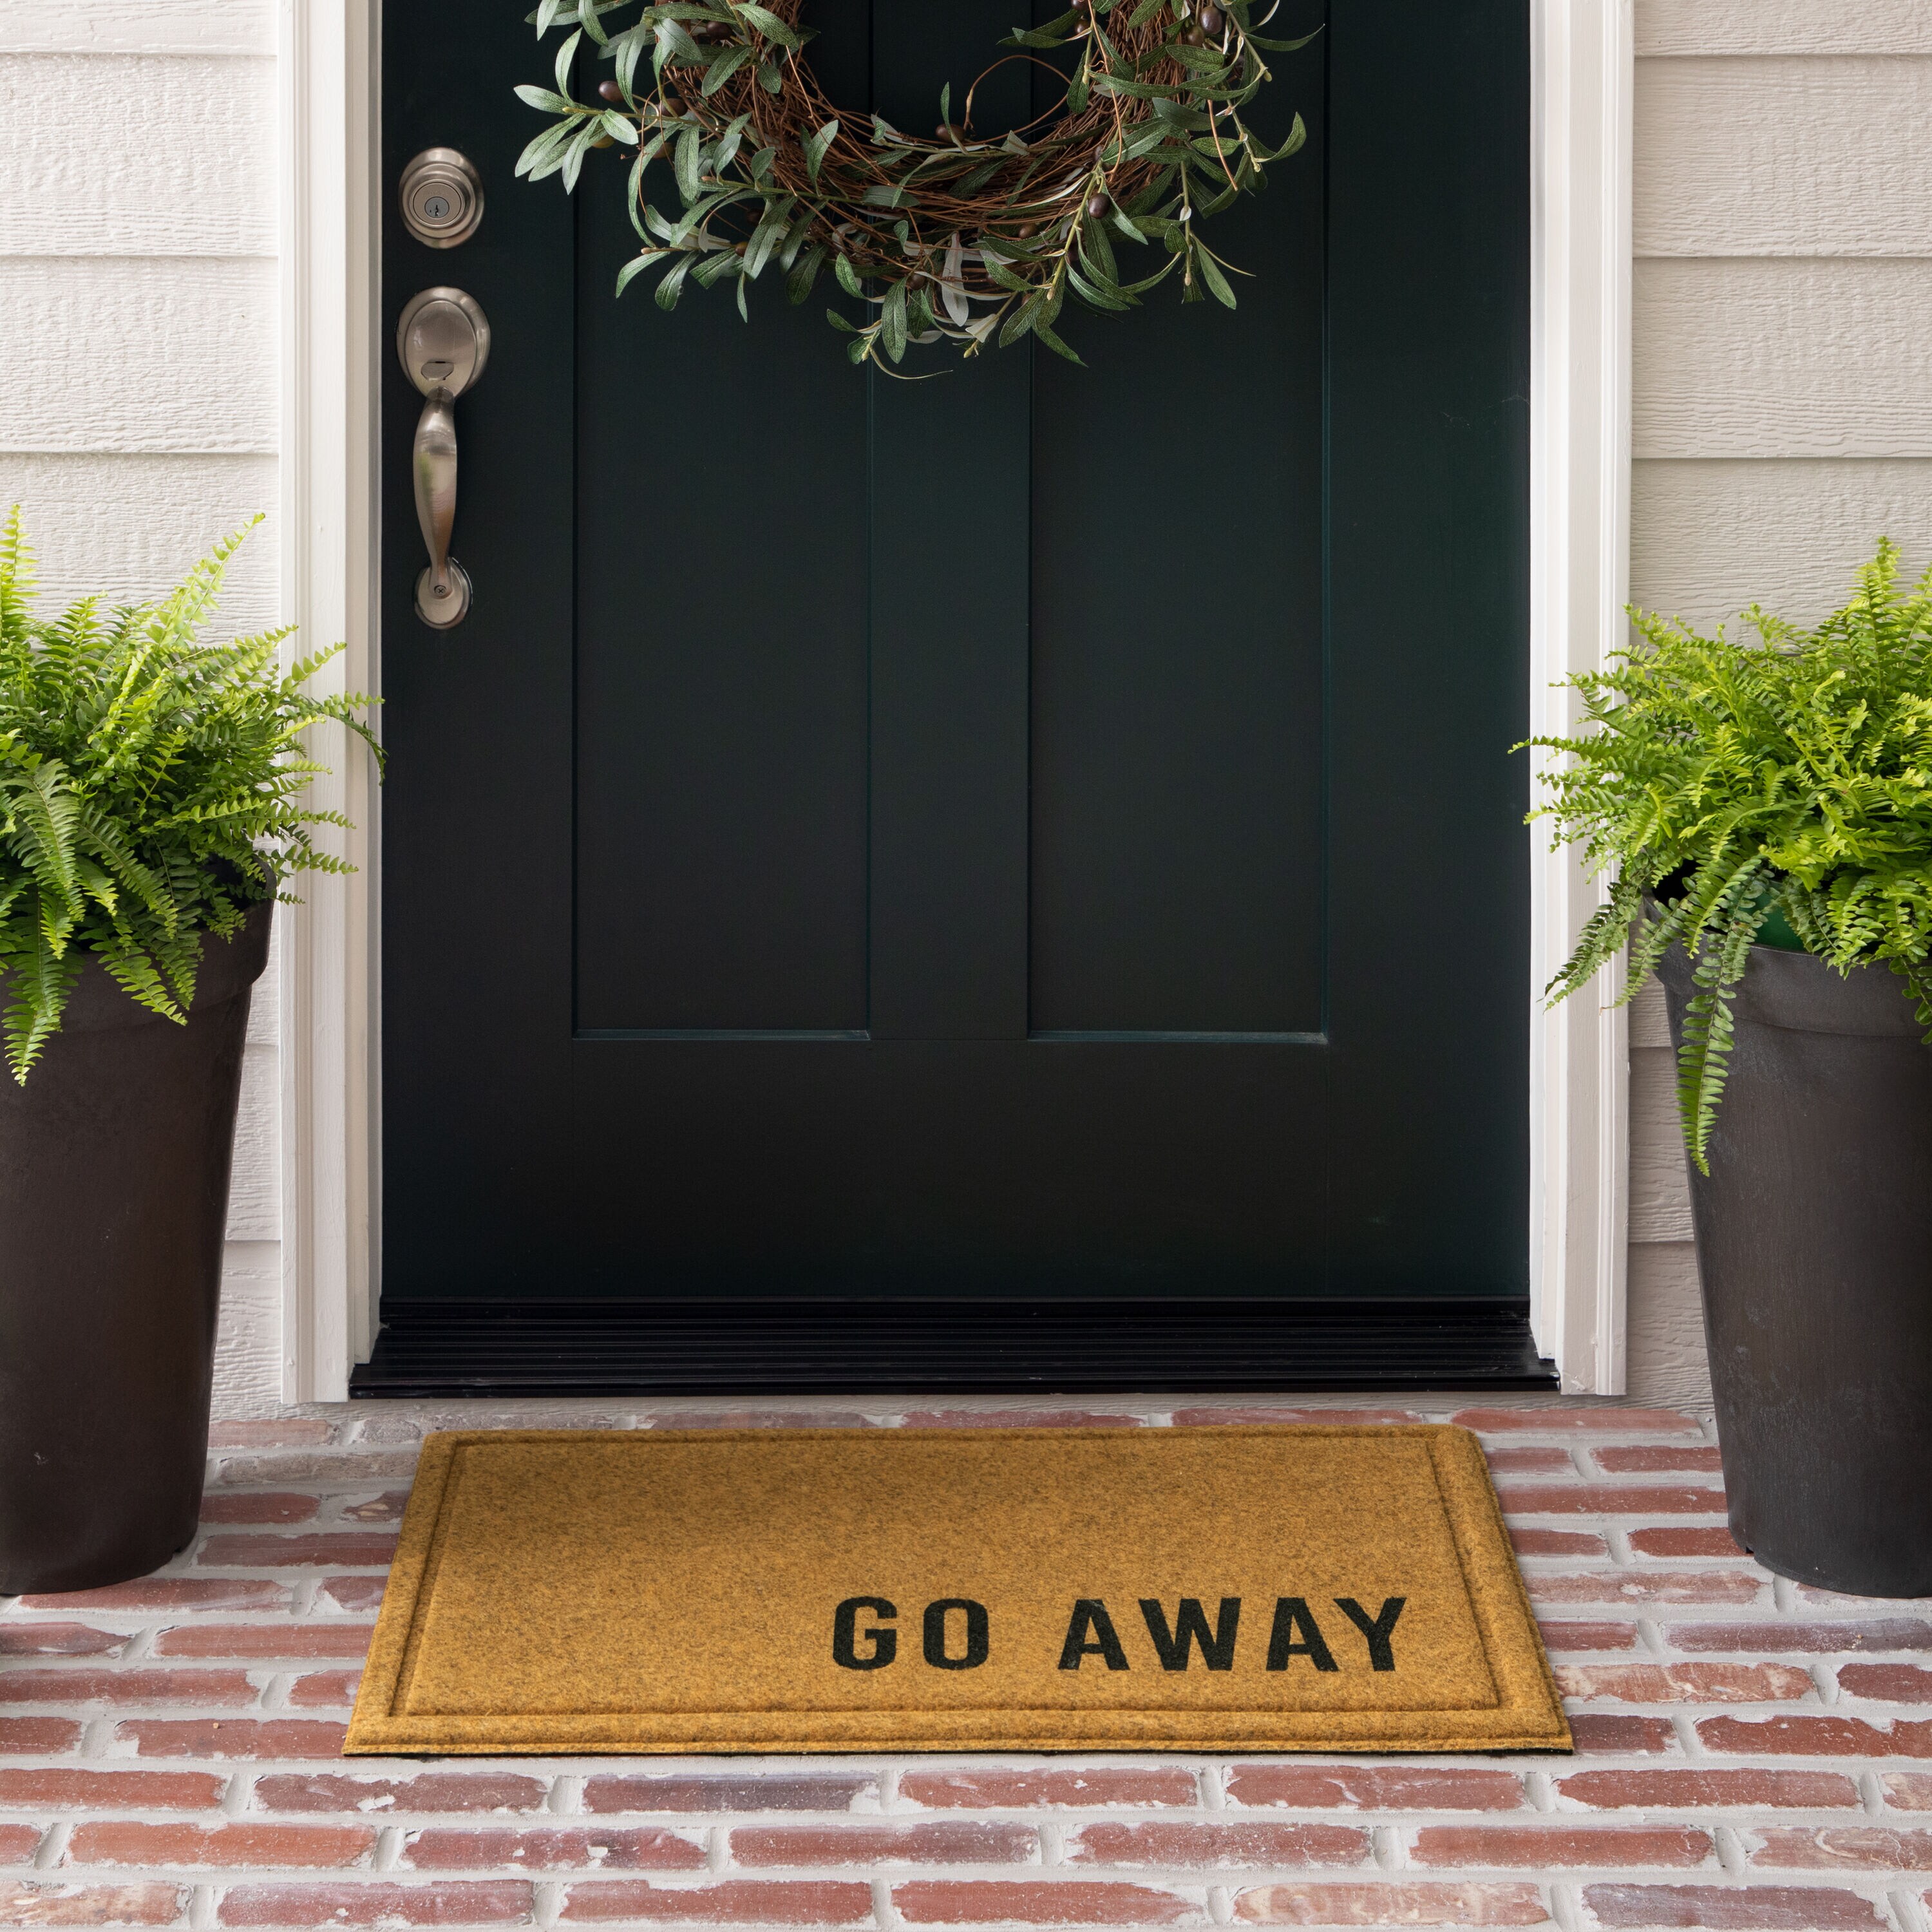 MTOUOCK Half Round Door Mats, 24x36 Inches Heavy-Duty Welcome Mat for Front Door with Non-Slip Rubber Backing, Durable Commercial Outside Doormat